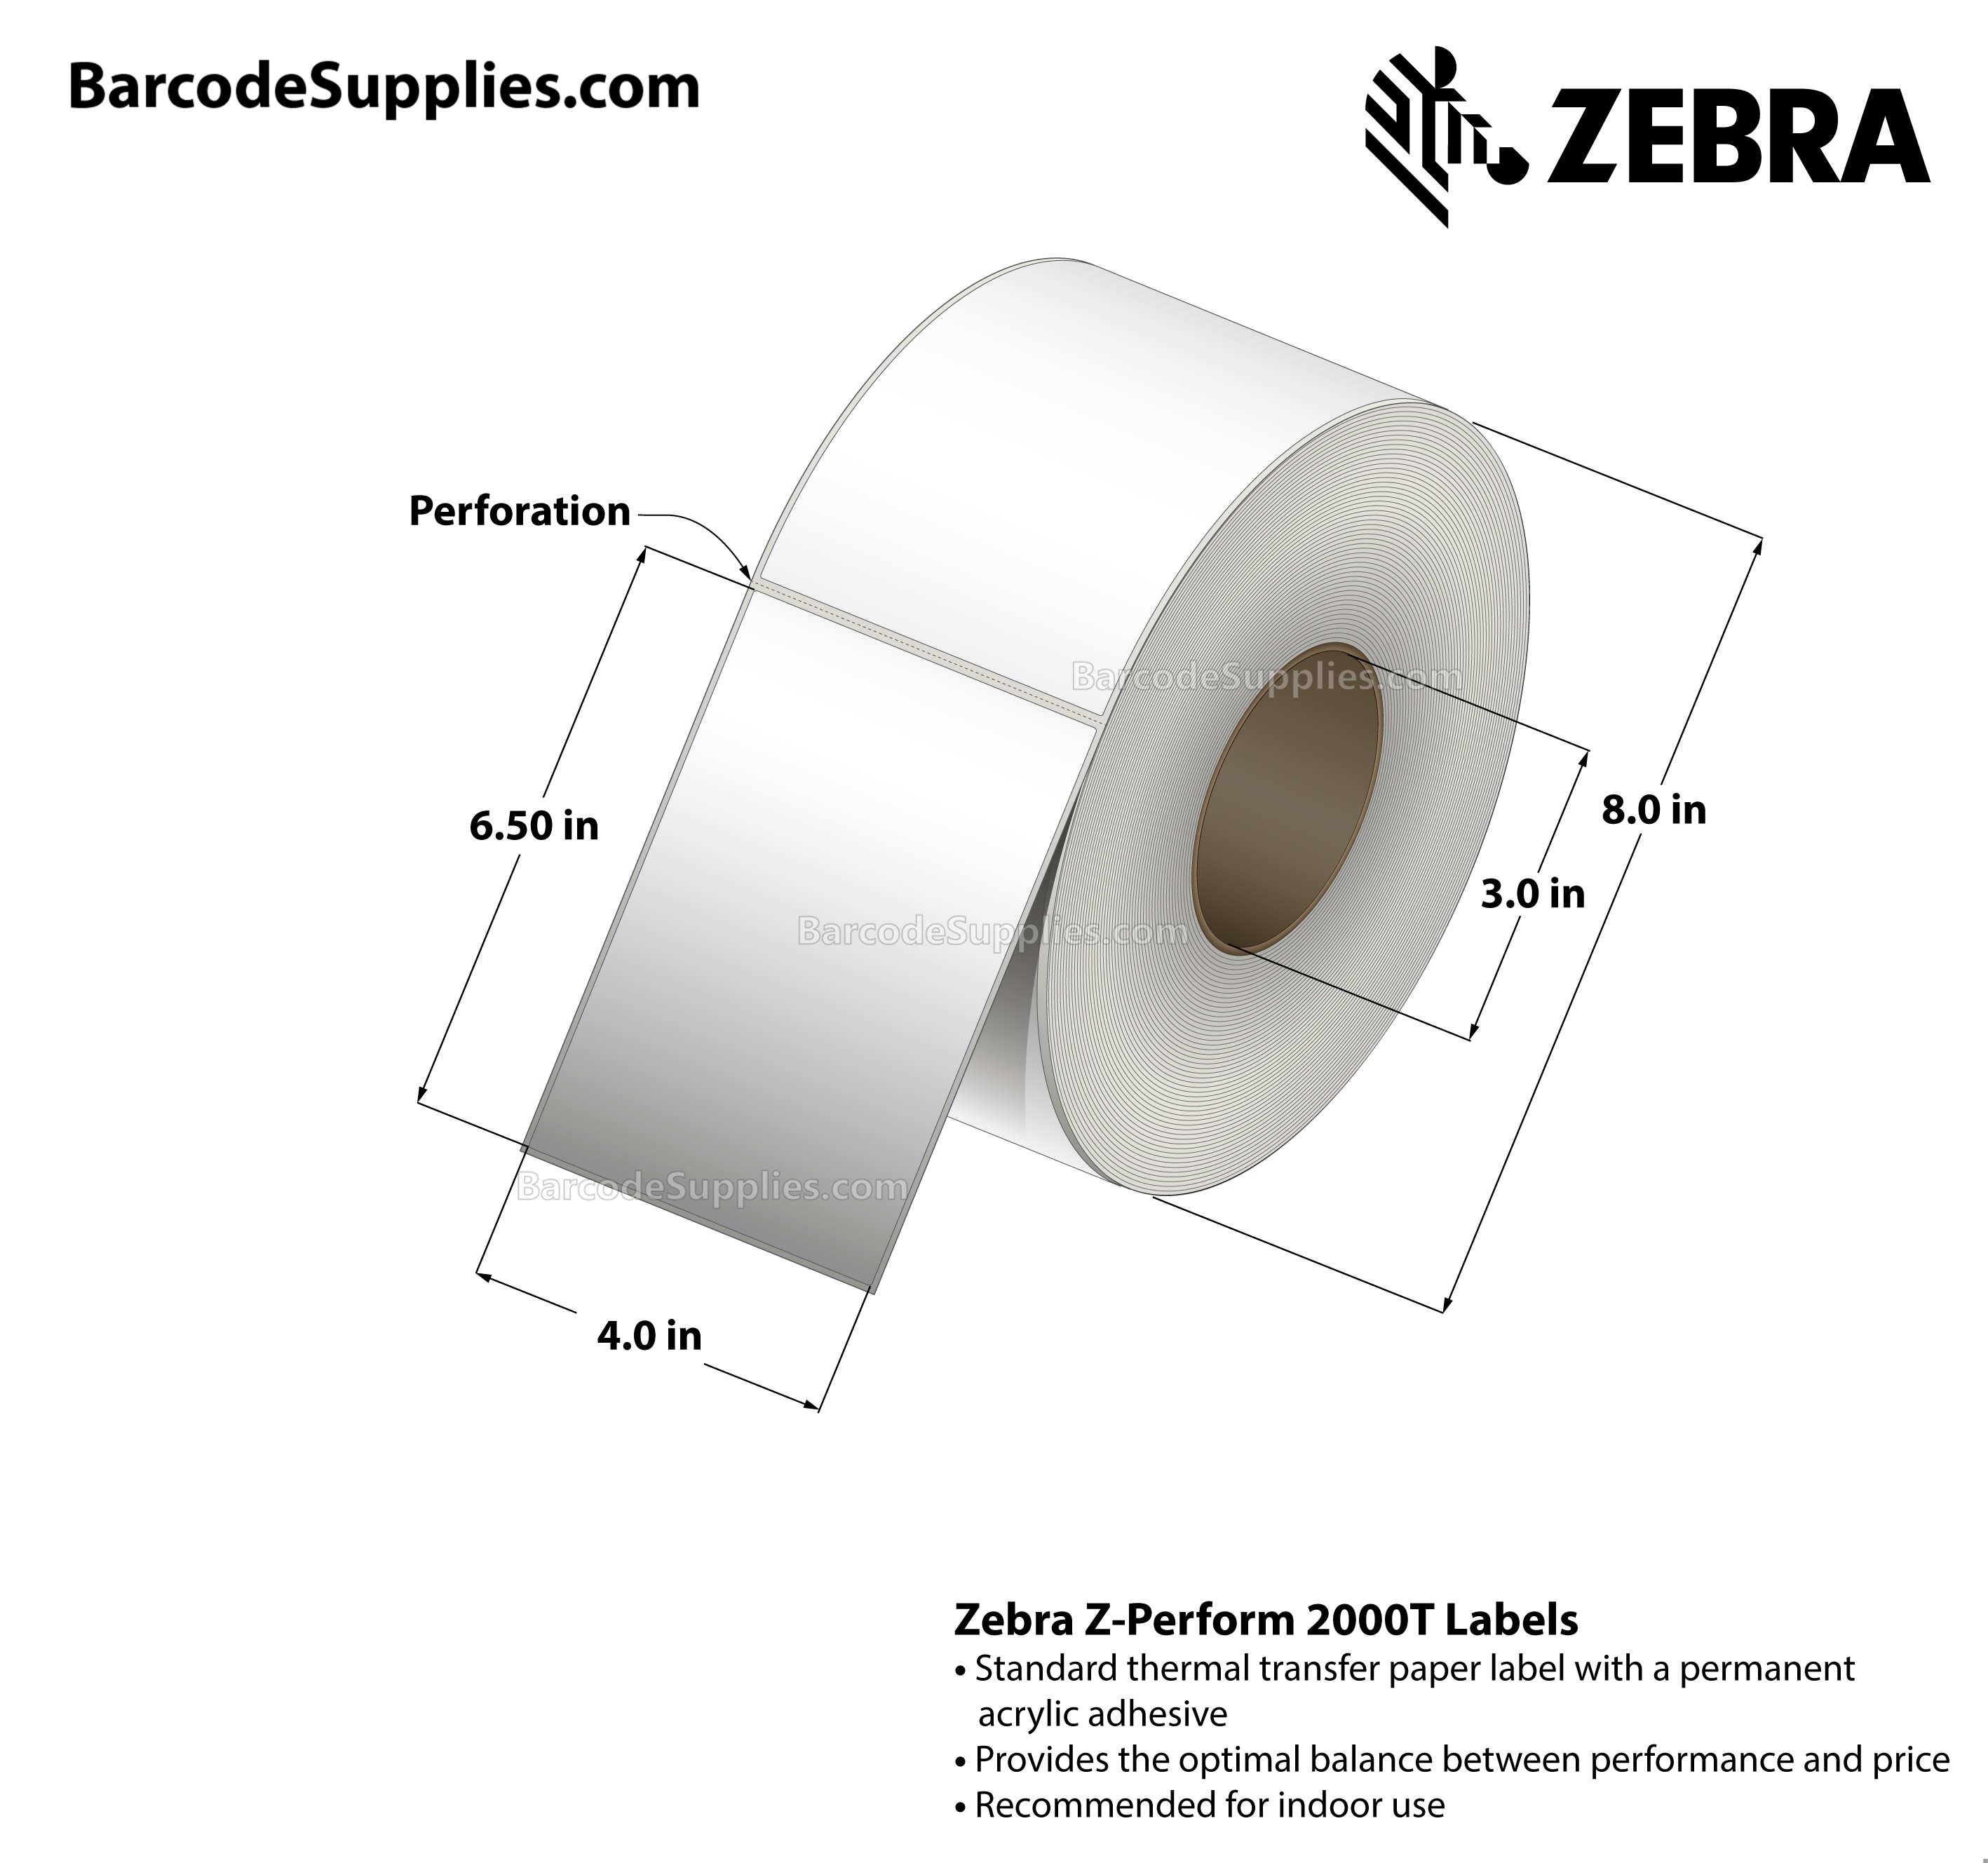 4 x 6.5 Thermal Transfer White Z-Perform 2000T Labels With Permanent Adhesive - Perforated - 900 Labels Per Roll - Carton Of 4 Rolls - 3600 Labels Total - MPN: 10000280